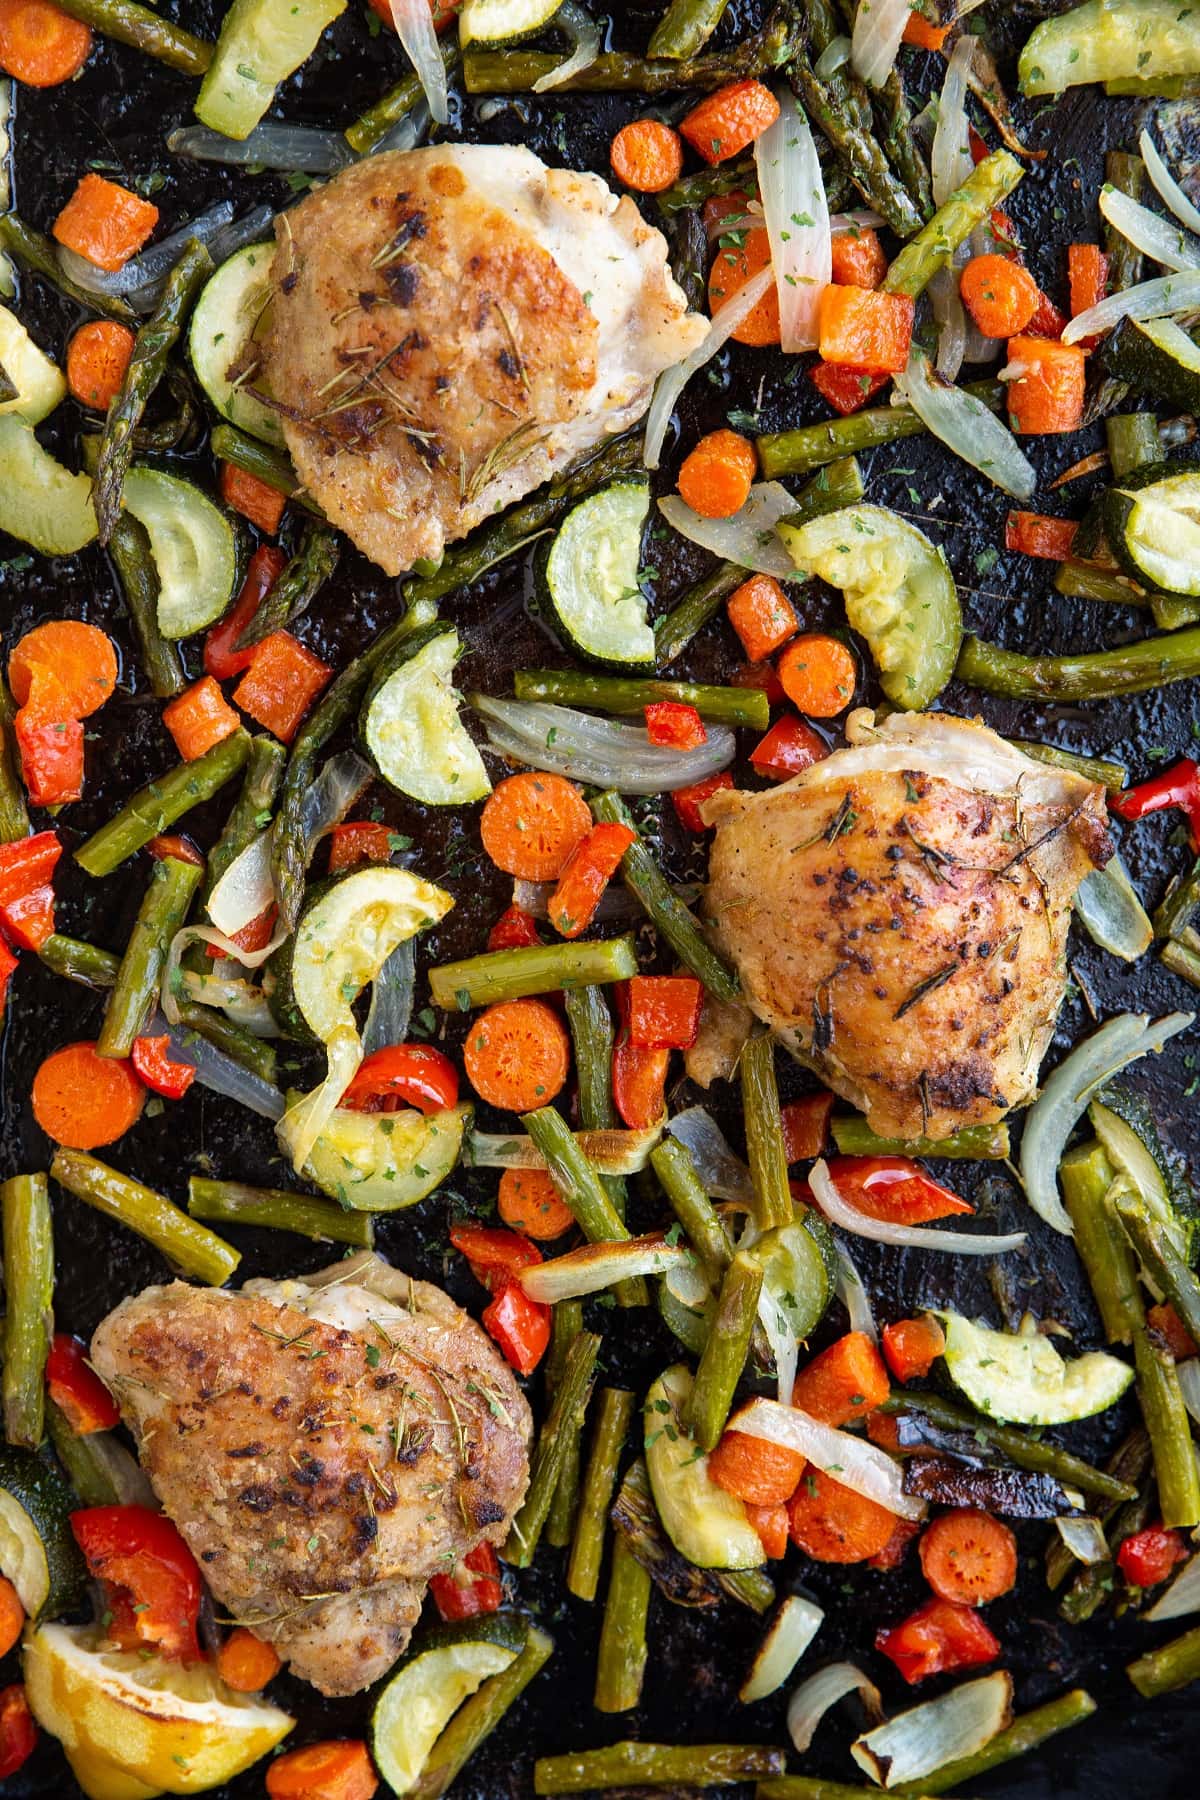 Sheet pan with crispy chicken thighs and vegetables.